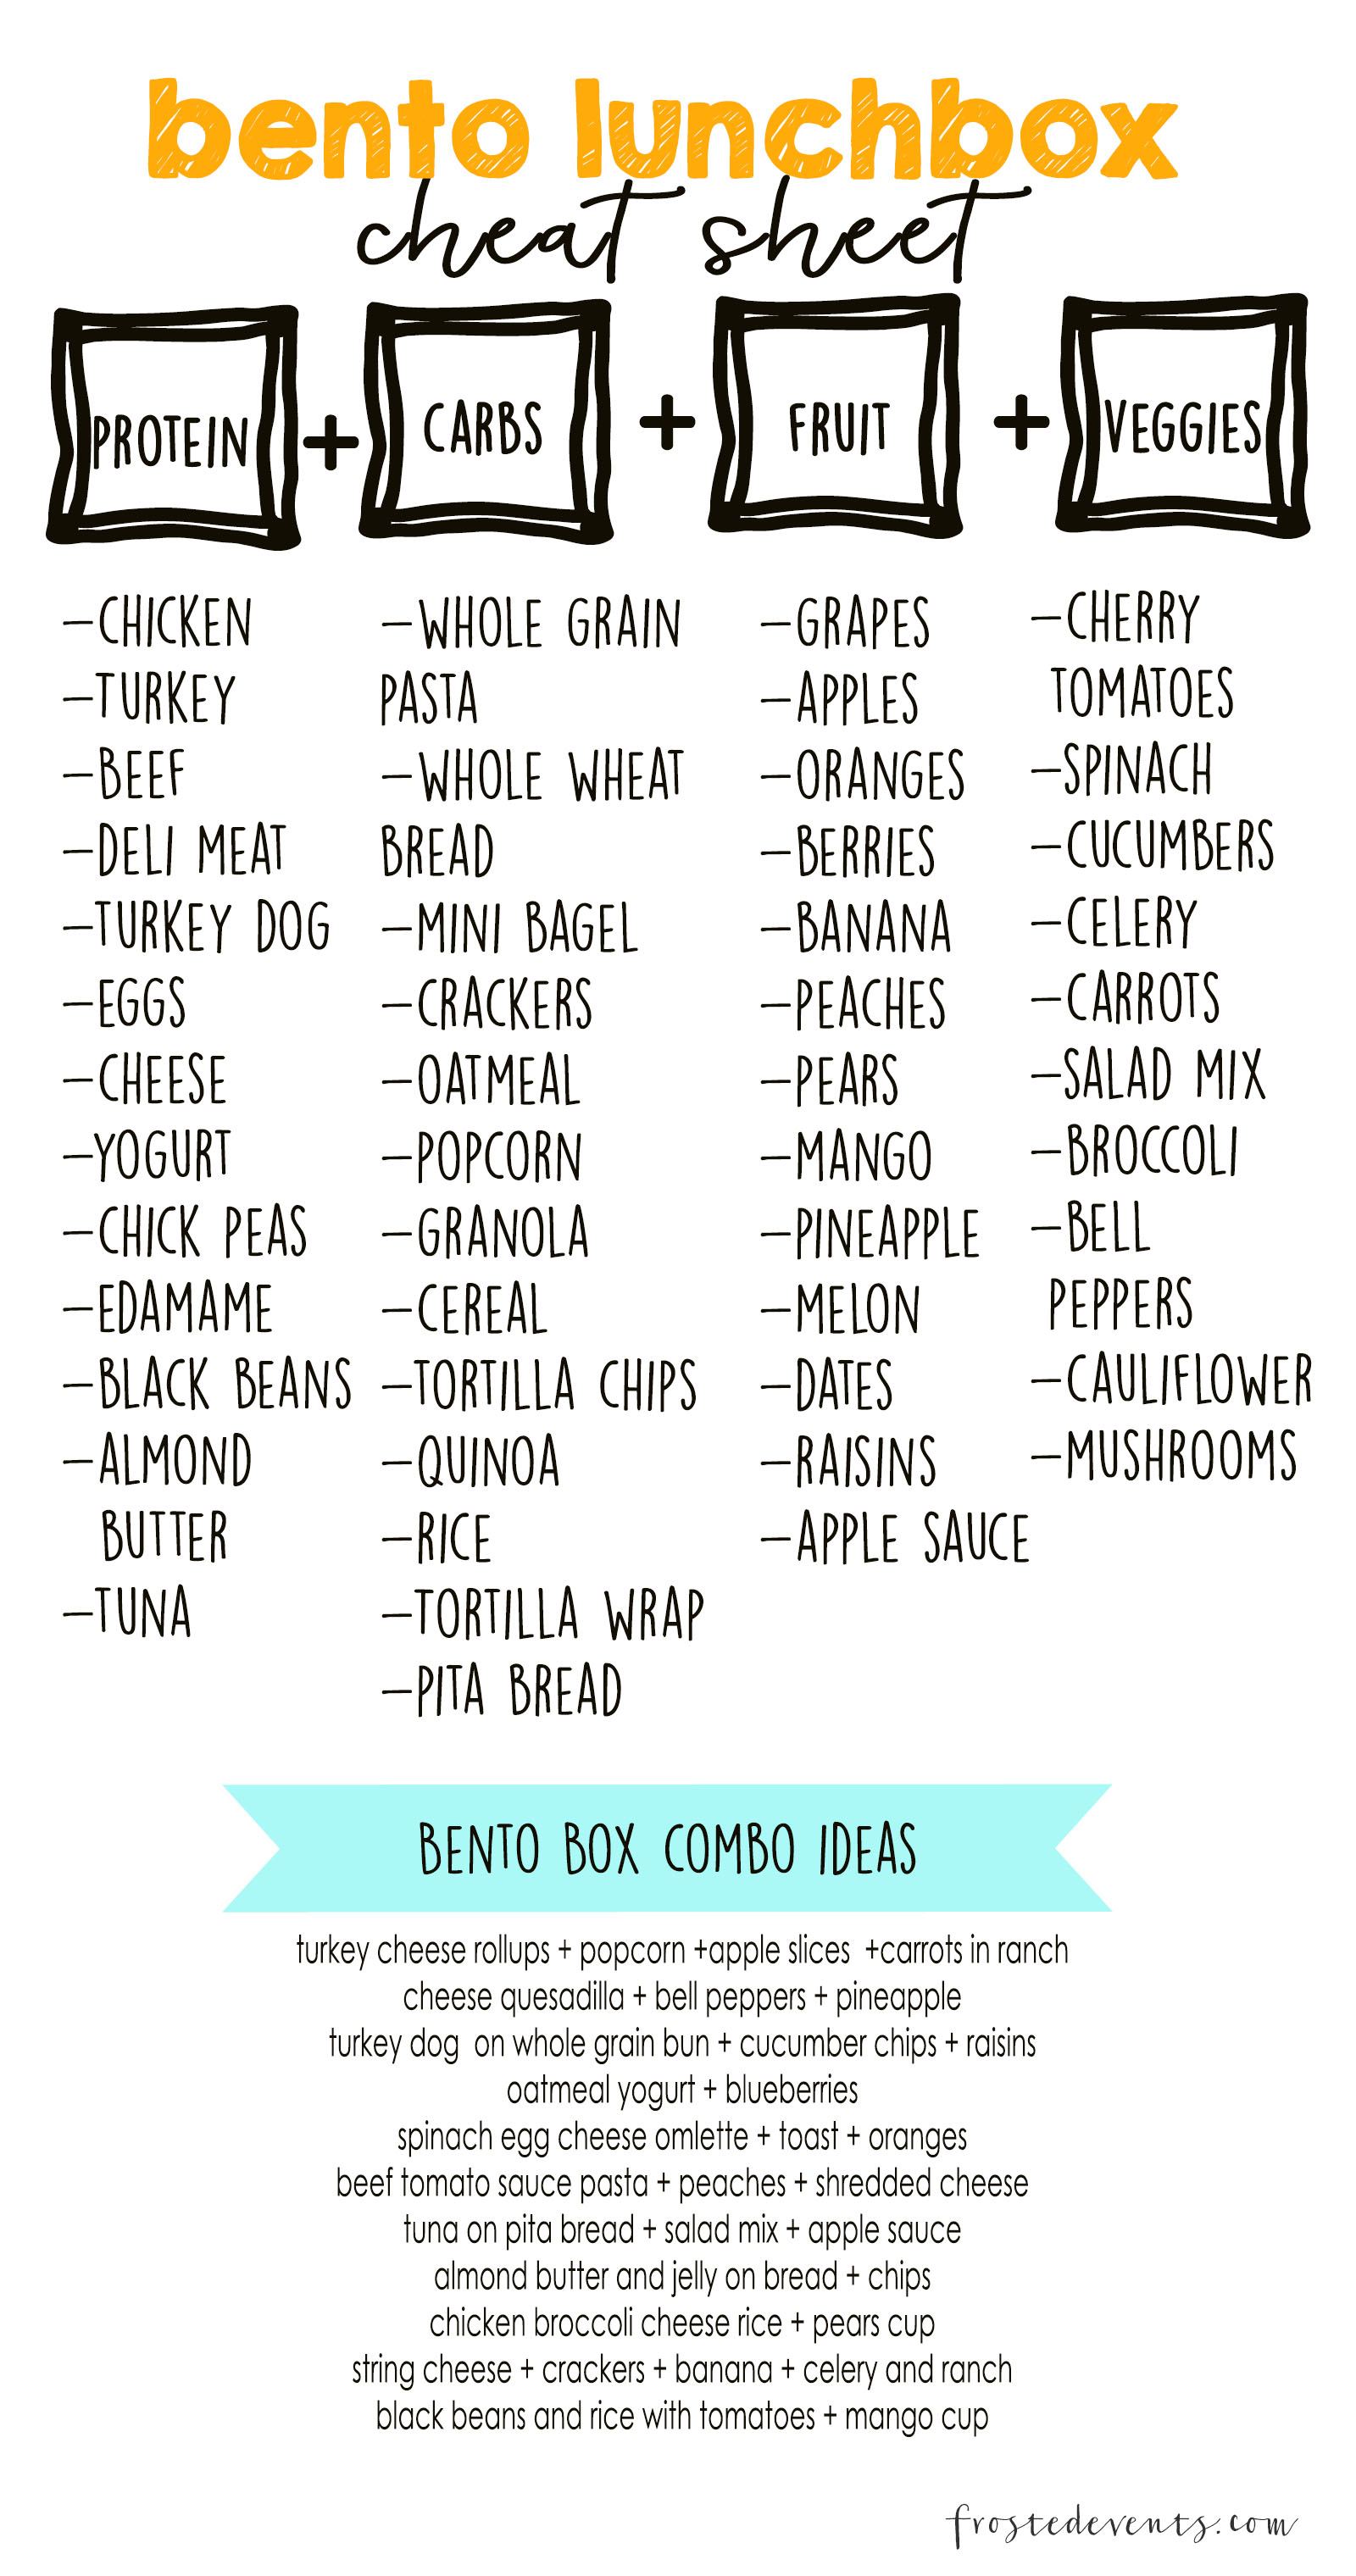 Grocery Shopping List for Bento Box Lunch Essentials - Simply Every